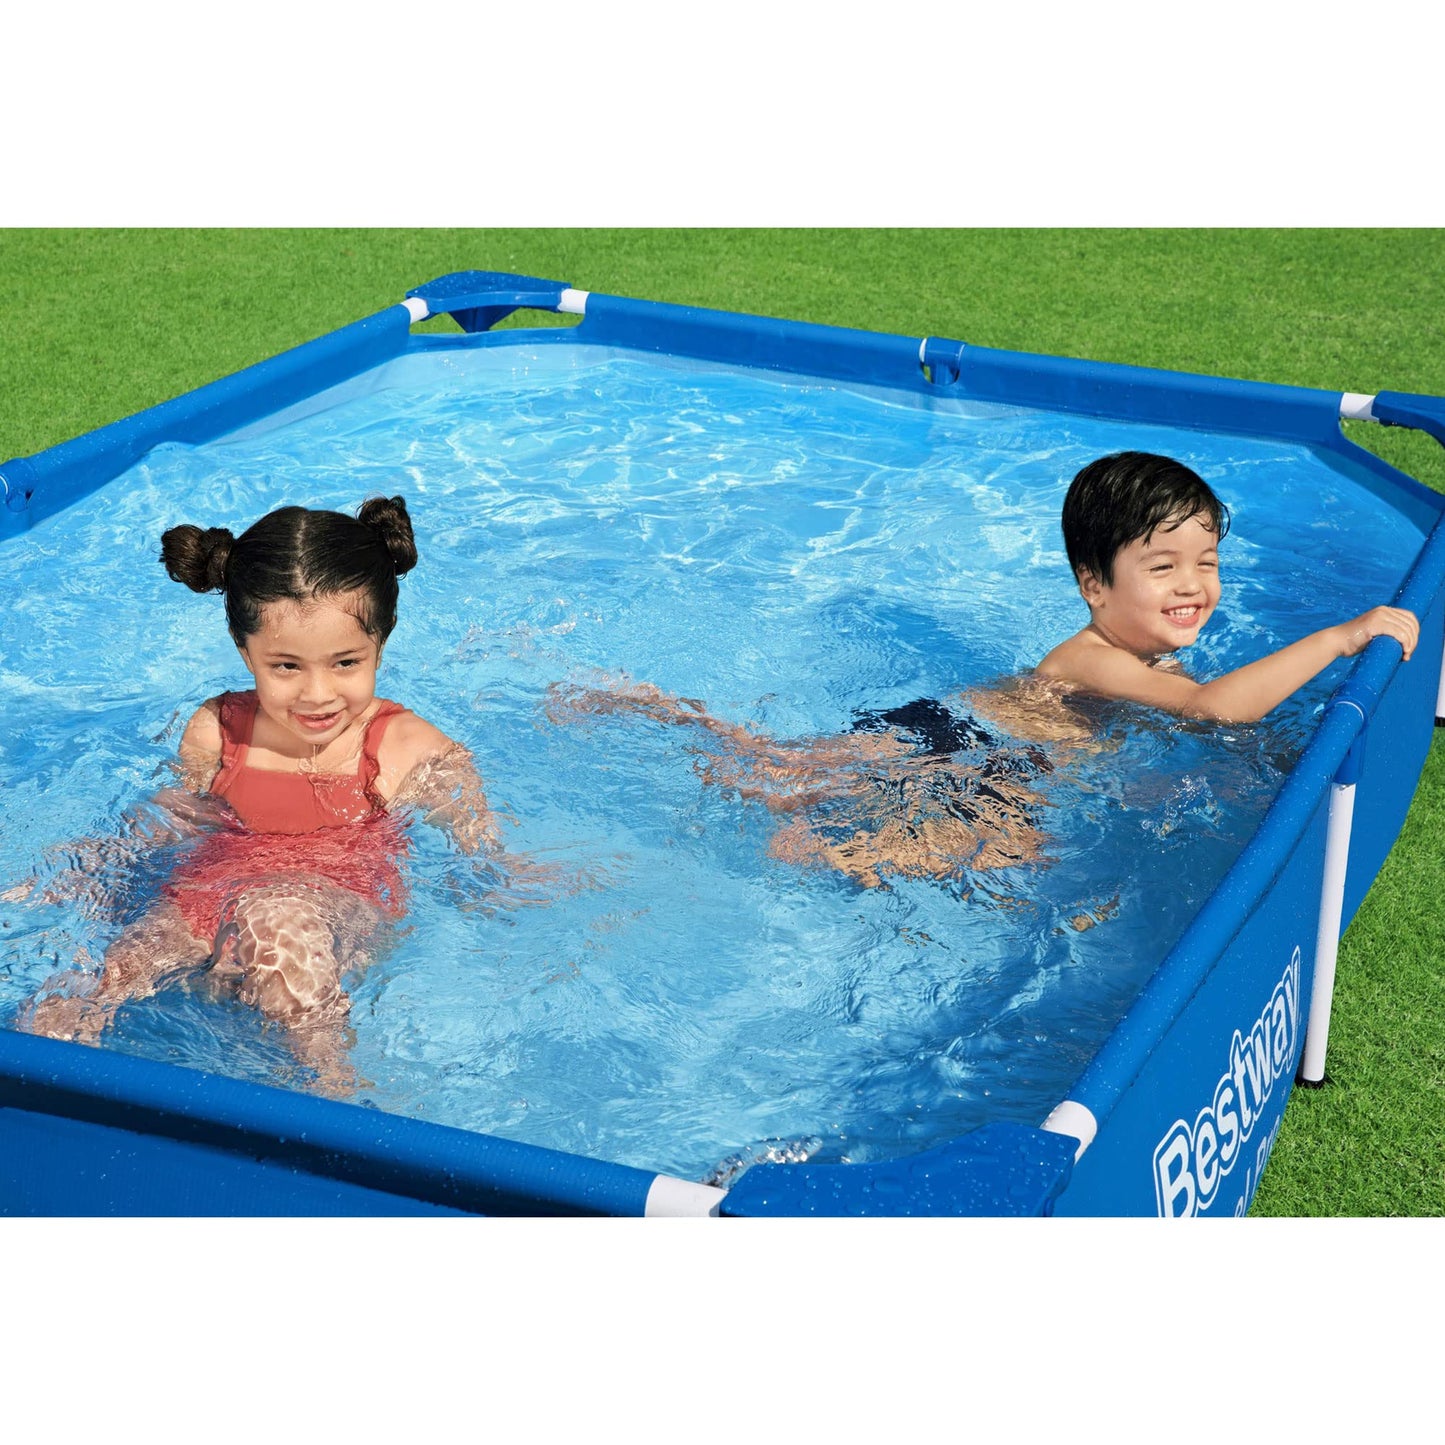 Bestway Steel Pro 87 Inch x 59 Inch x 17 Inch Rectangular Metal Frame Above Ground Outdoor Backyard Swimming Pool, Blue (Pool Only) 7.25' x 4.9' x 17"